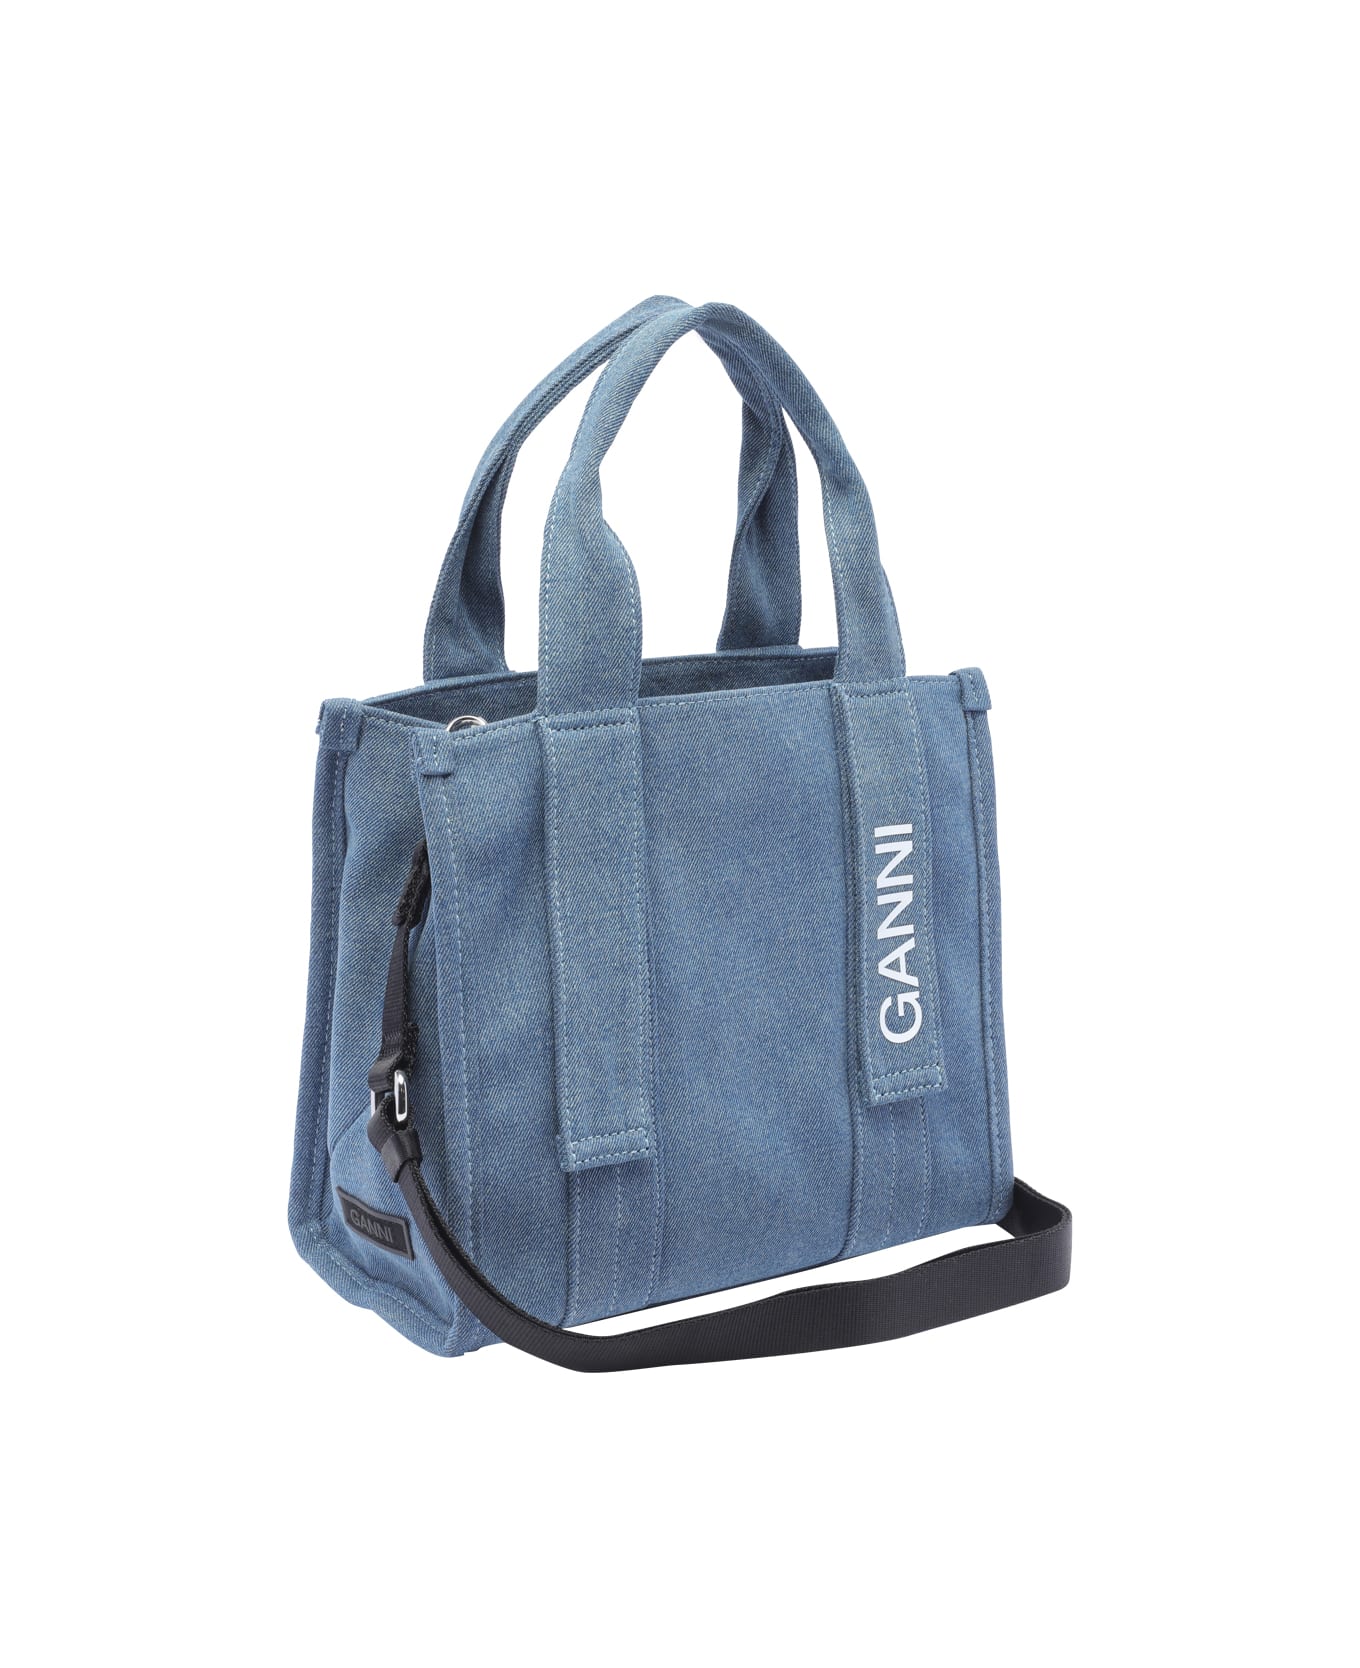 Ganni Recycled Tech Small Tote Denim - Blue